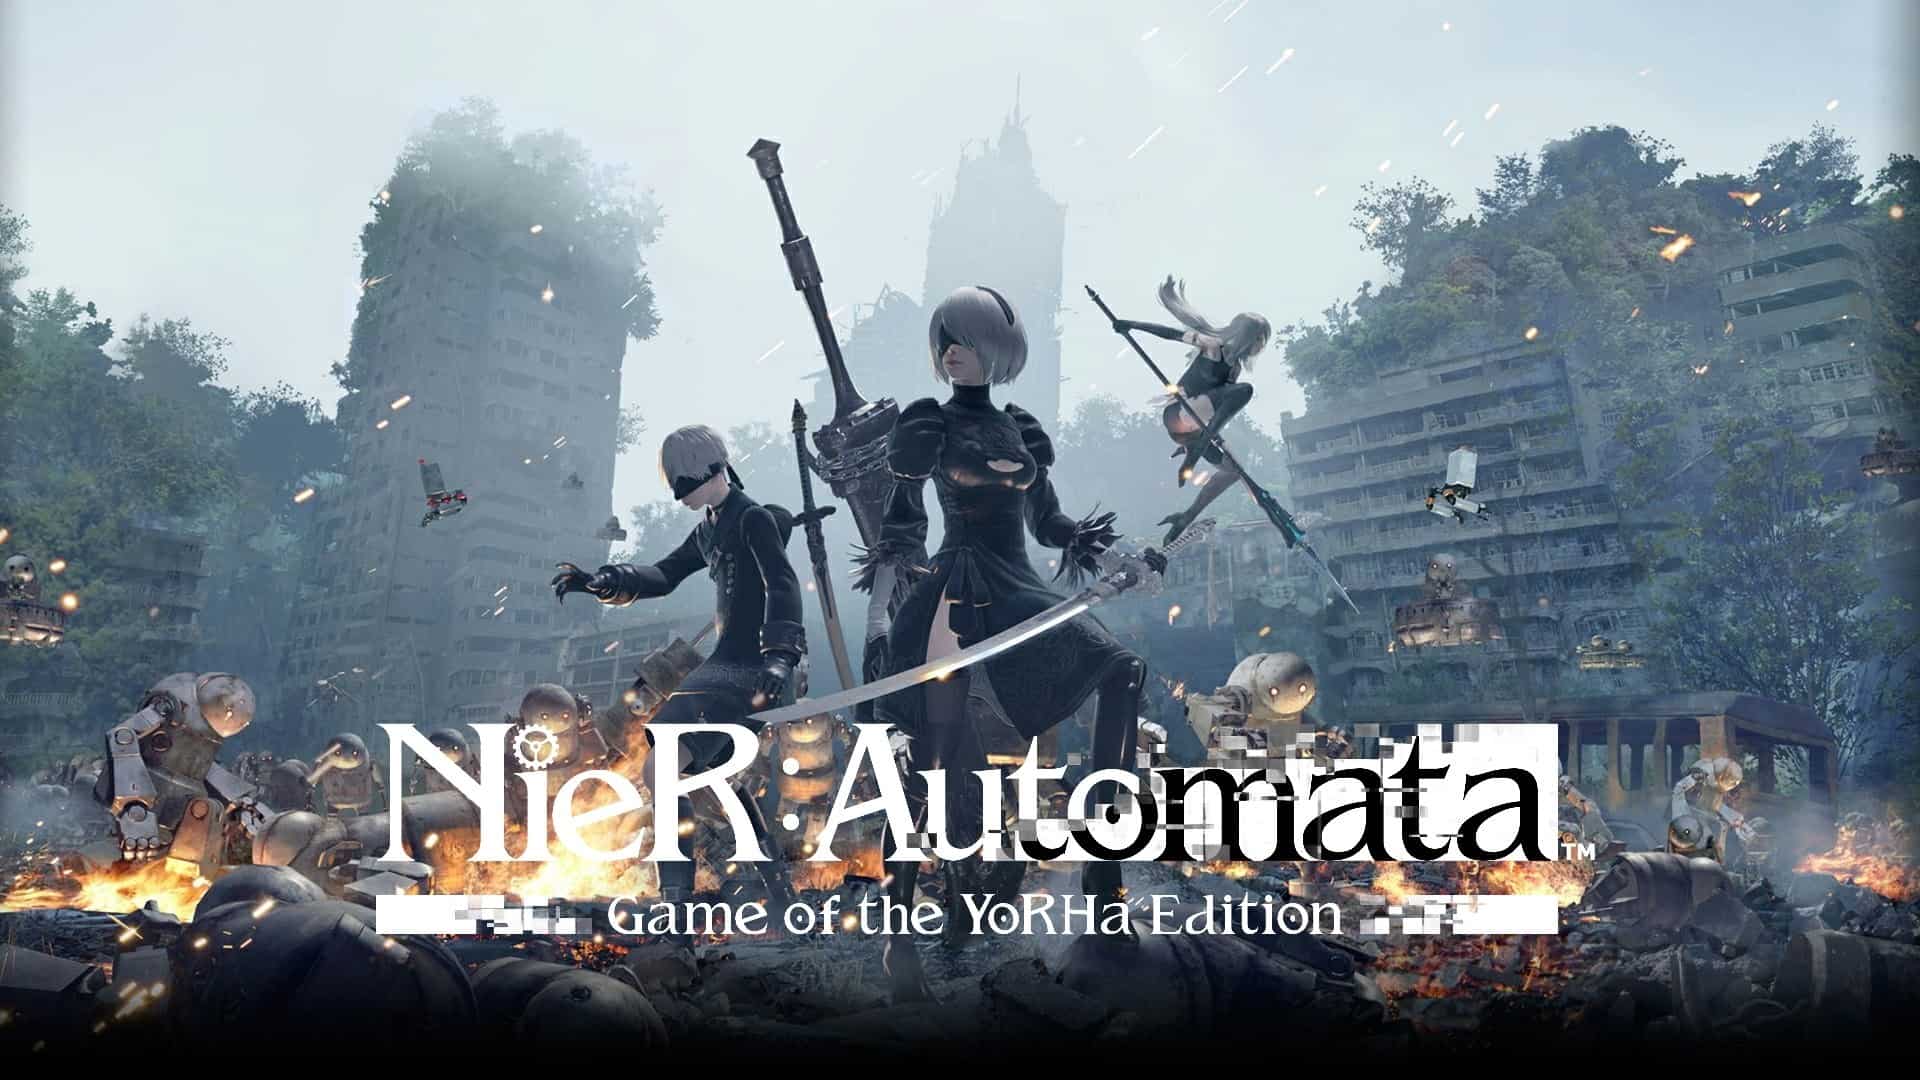 Used] Nintendo Switch - NieR:Automata The End of YoRHa Edition